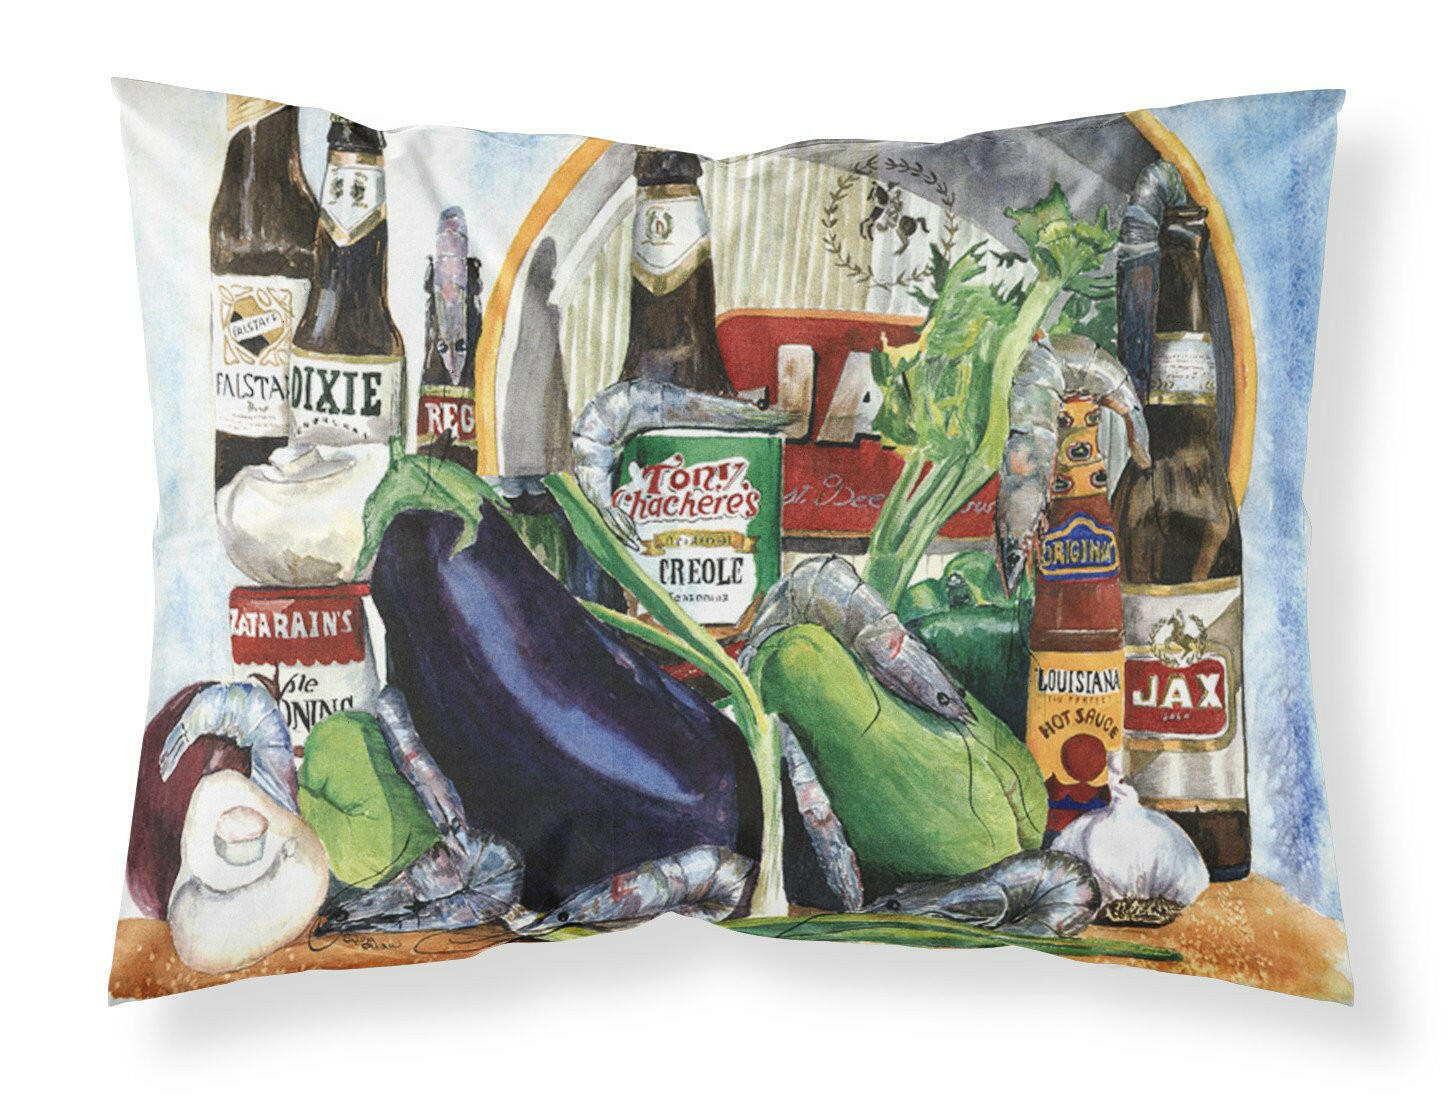 Eggplant and New Orleans Beers  Moisture wicking Fabric standard pillowcase by Caroline's Treasures